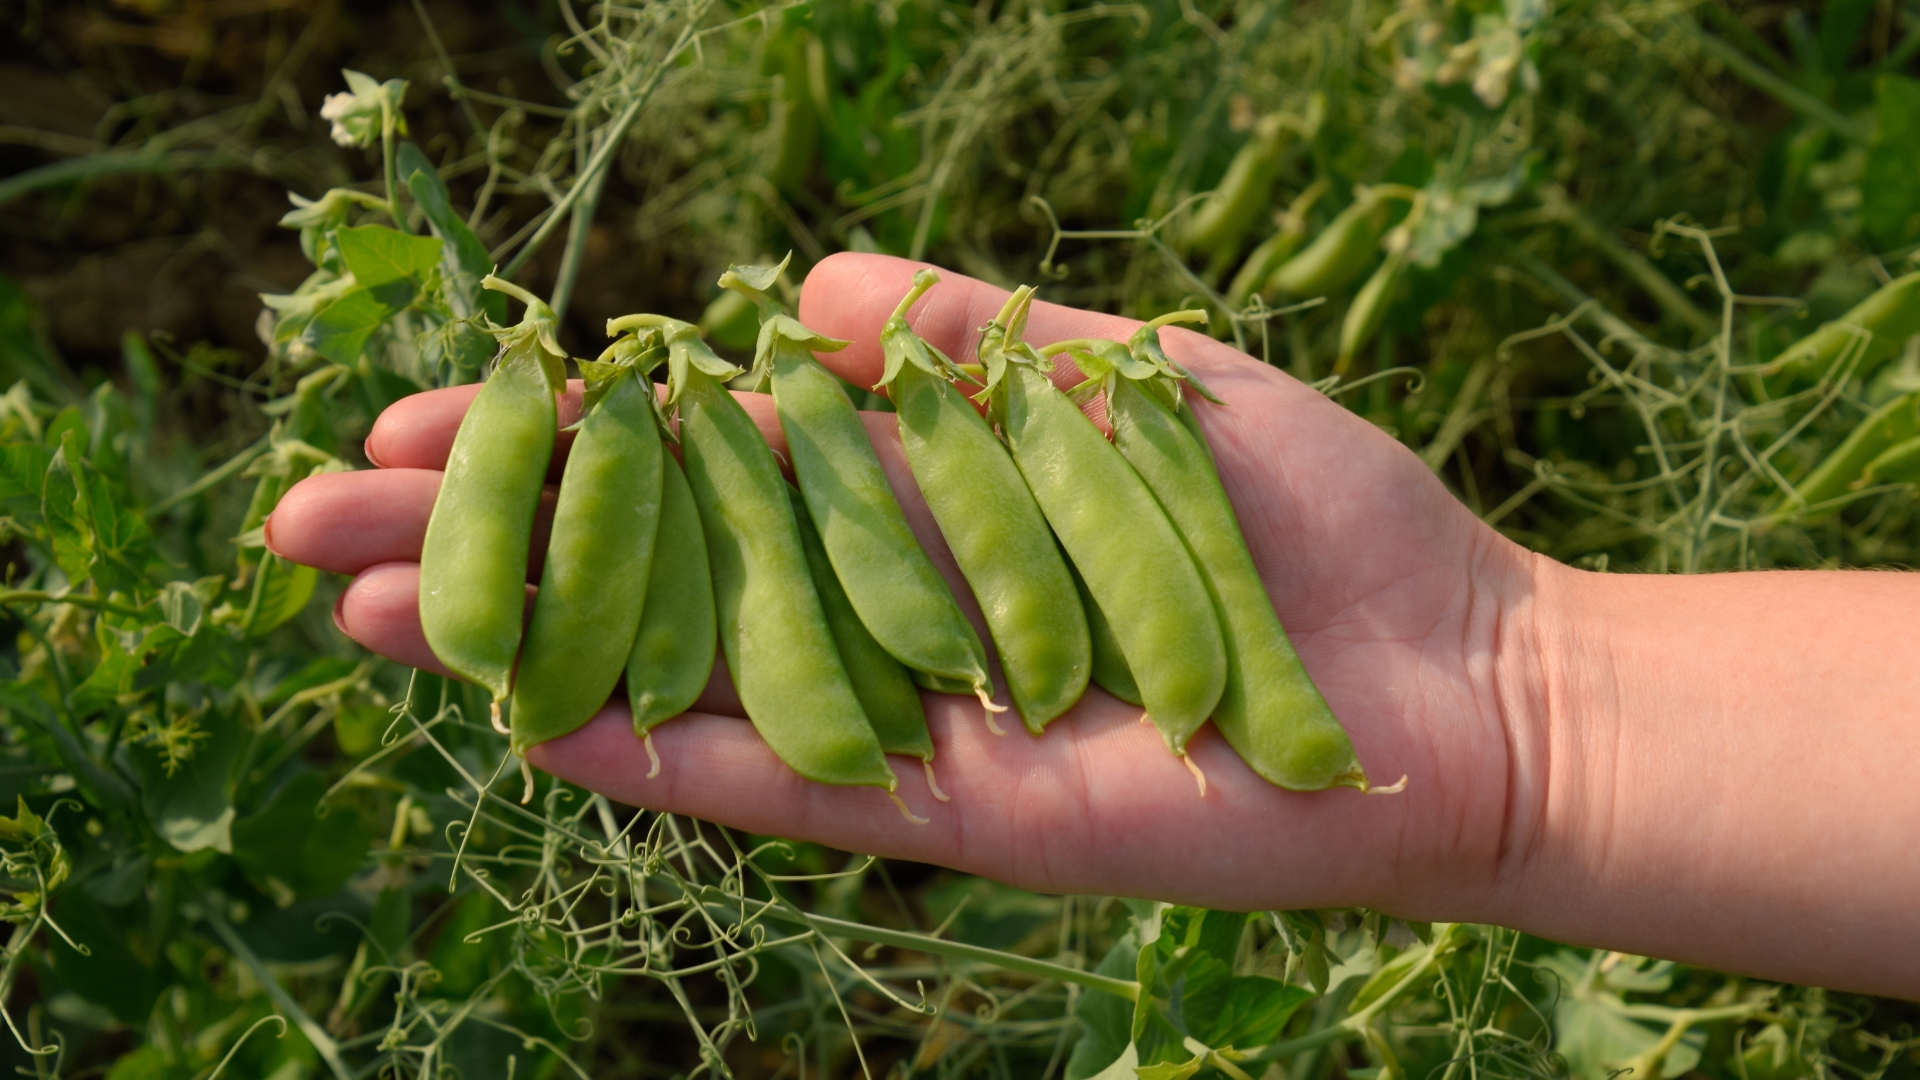 This Is The Number #1 Reason Why You Should Start Growing Peas In Your Home Garden